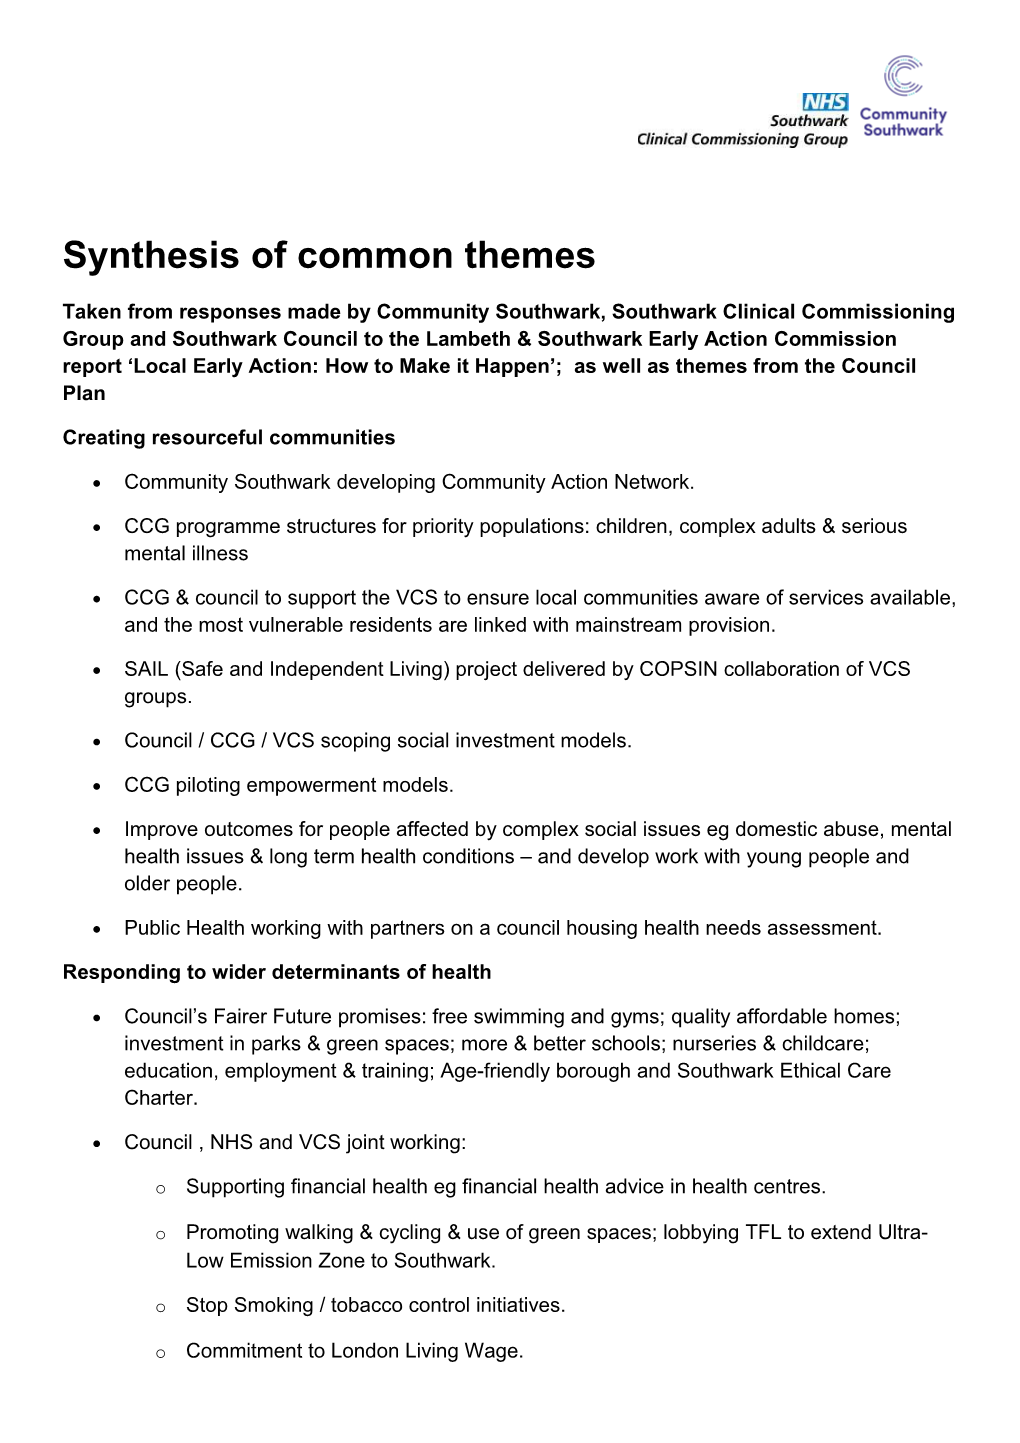 Synthesis of Common Themes